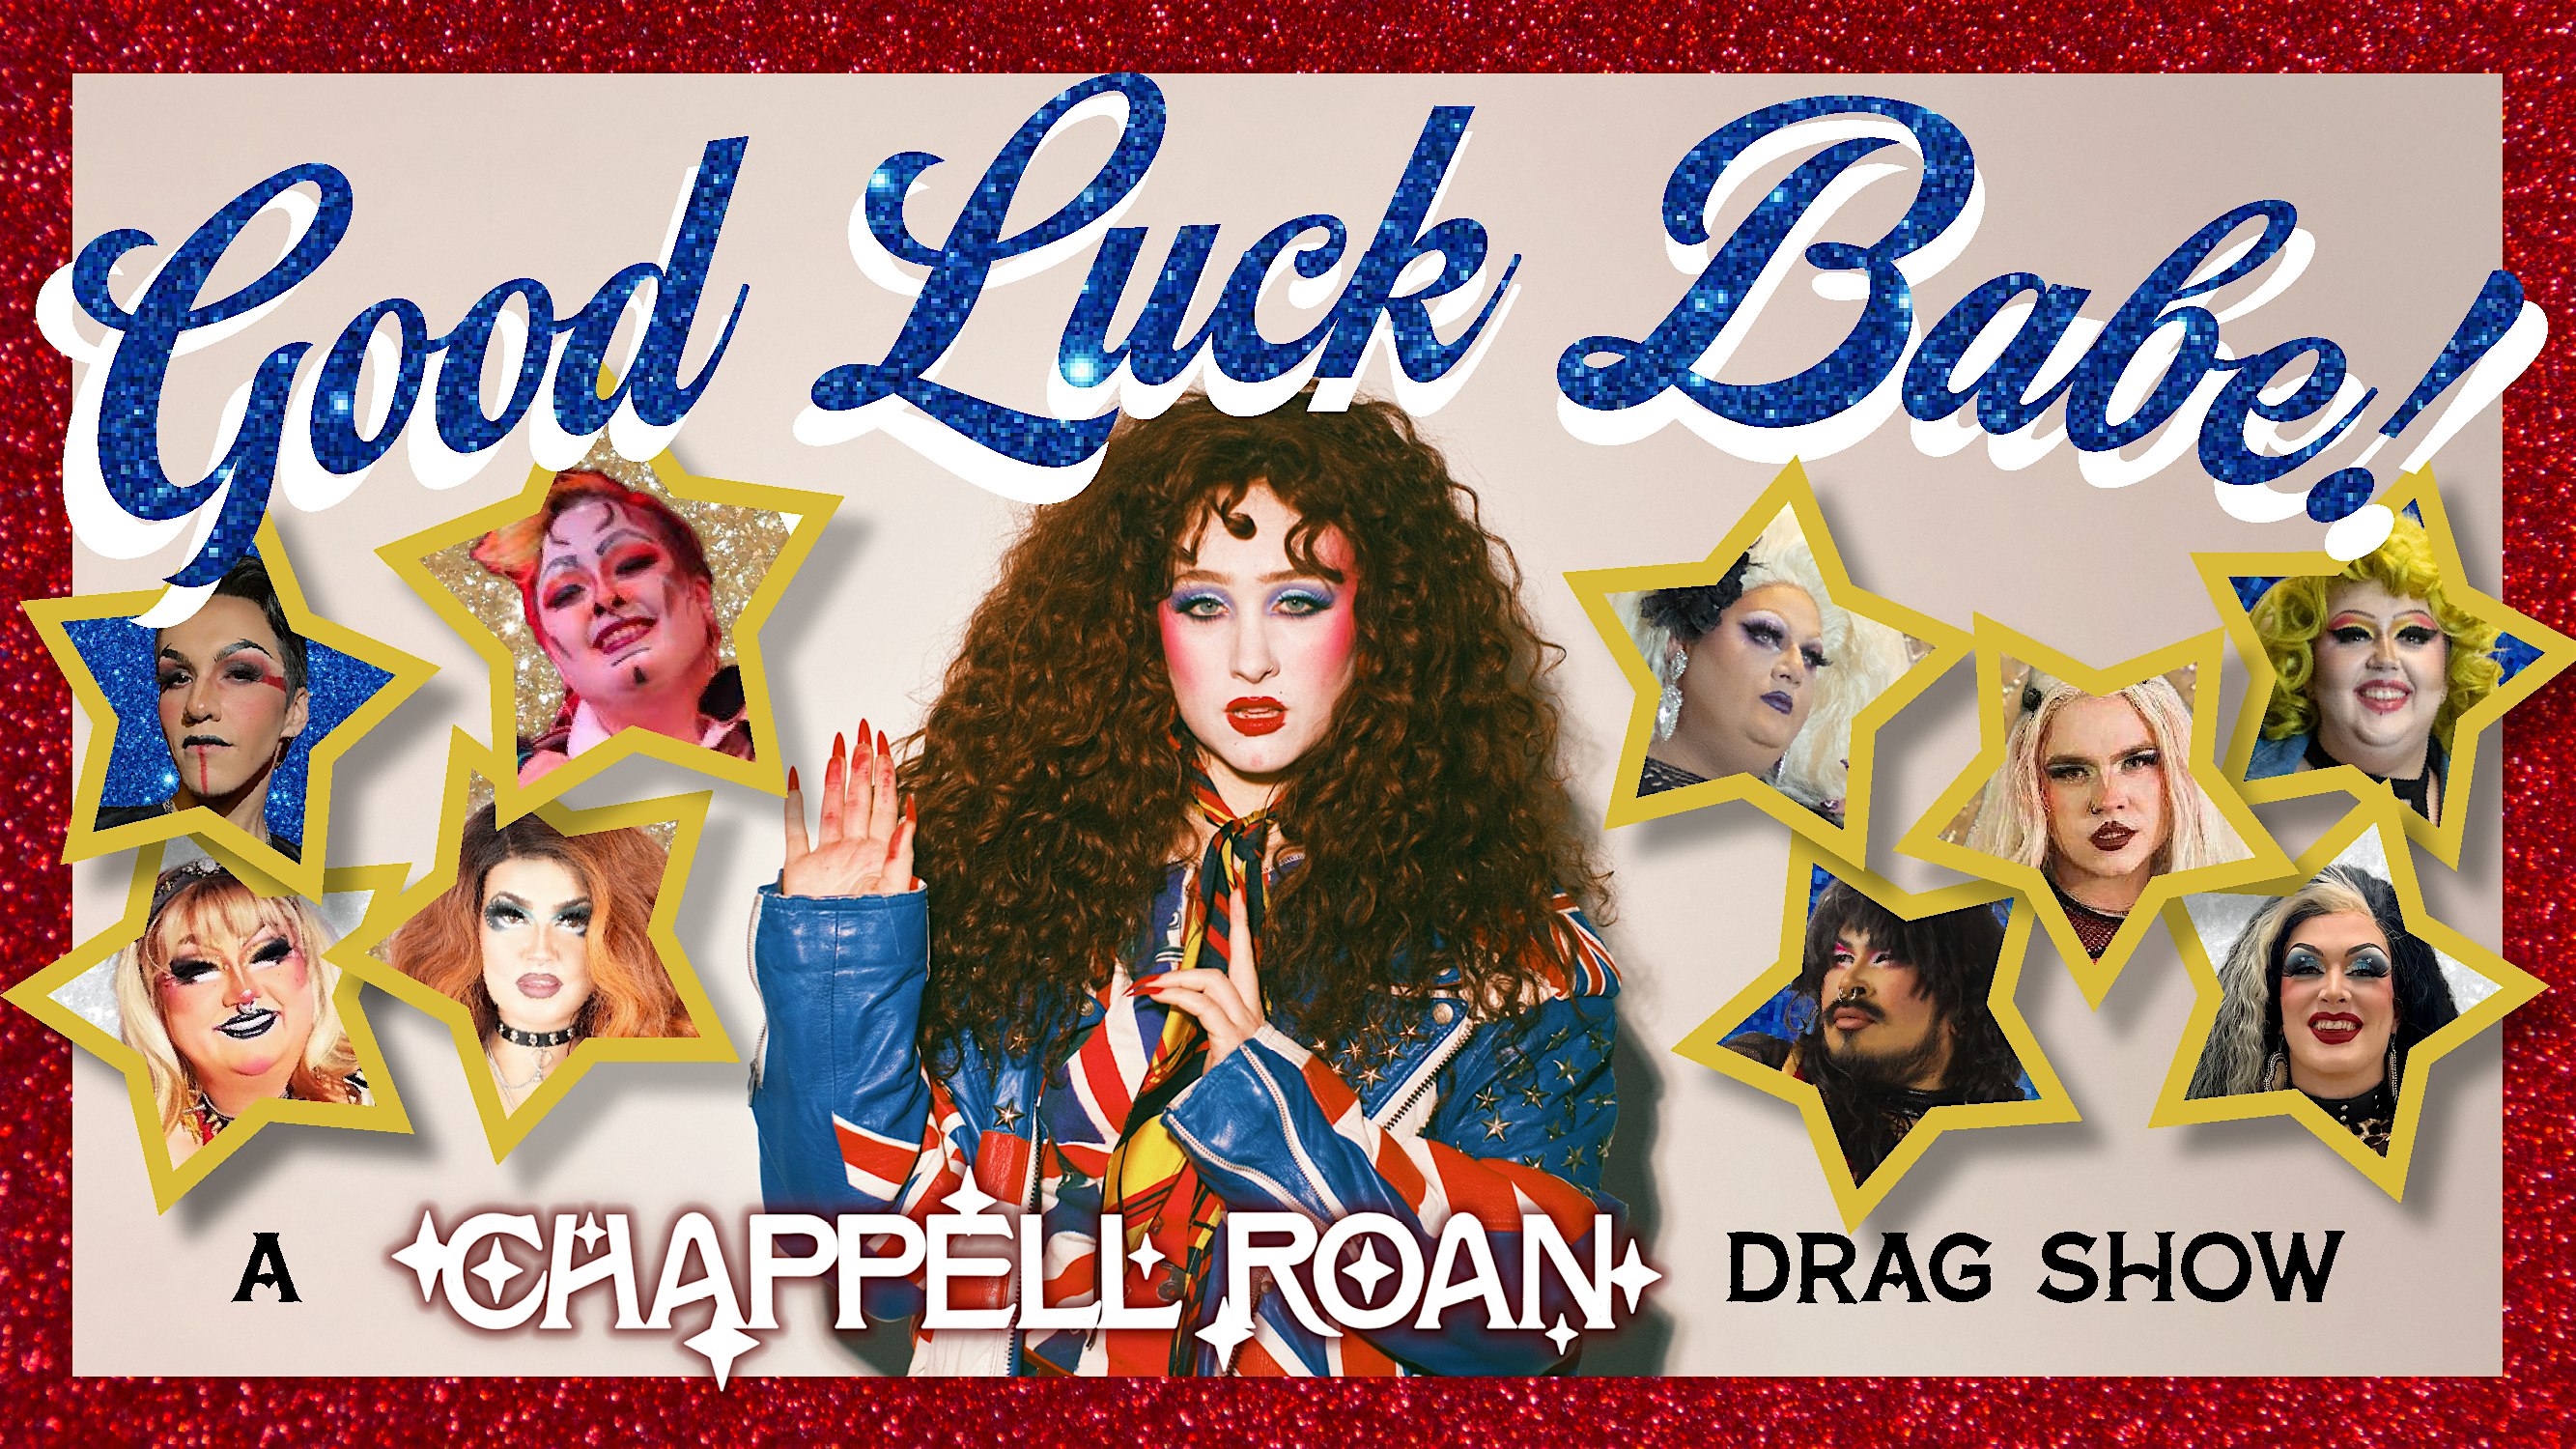 Good Luck Babe! A Chappell Roan Drag Show